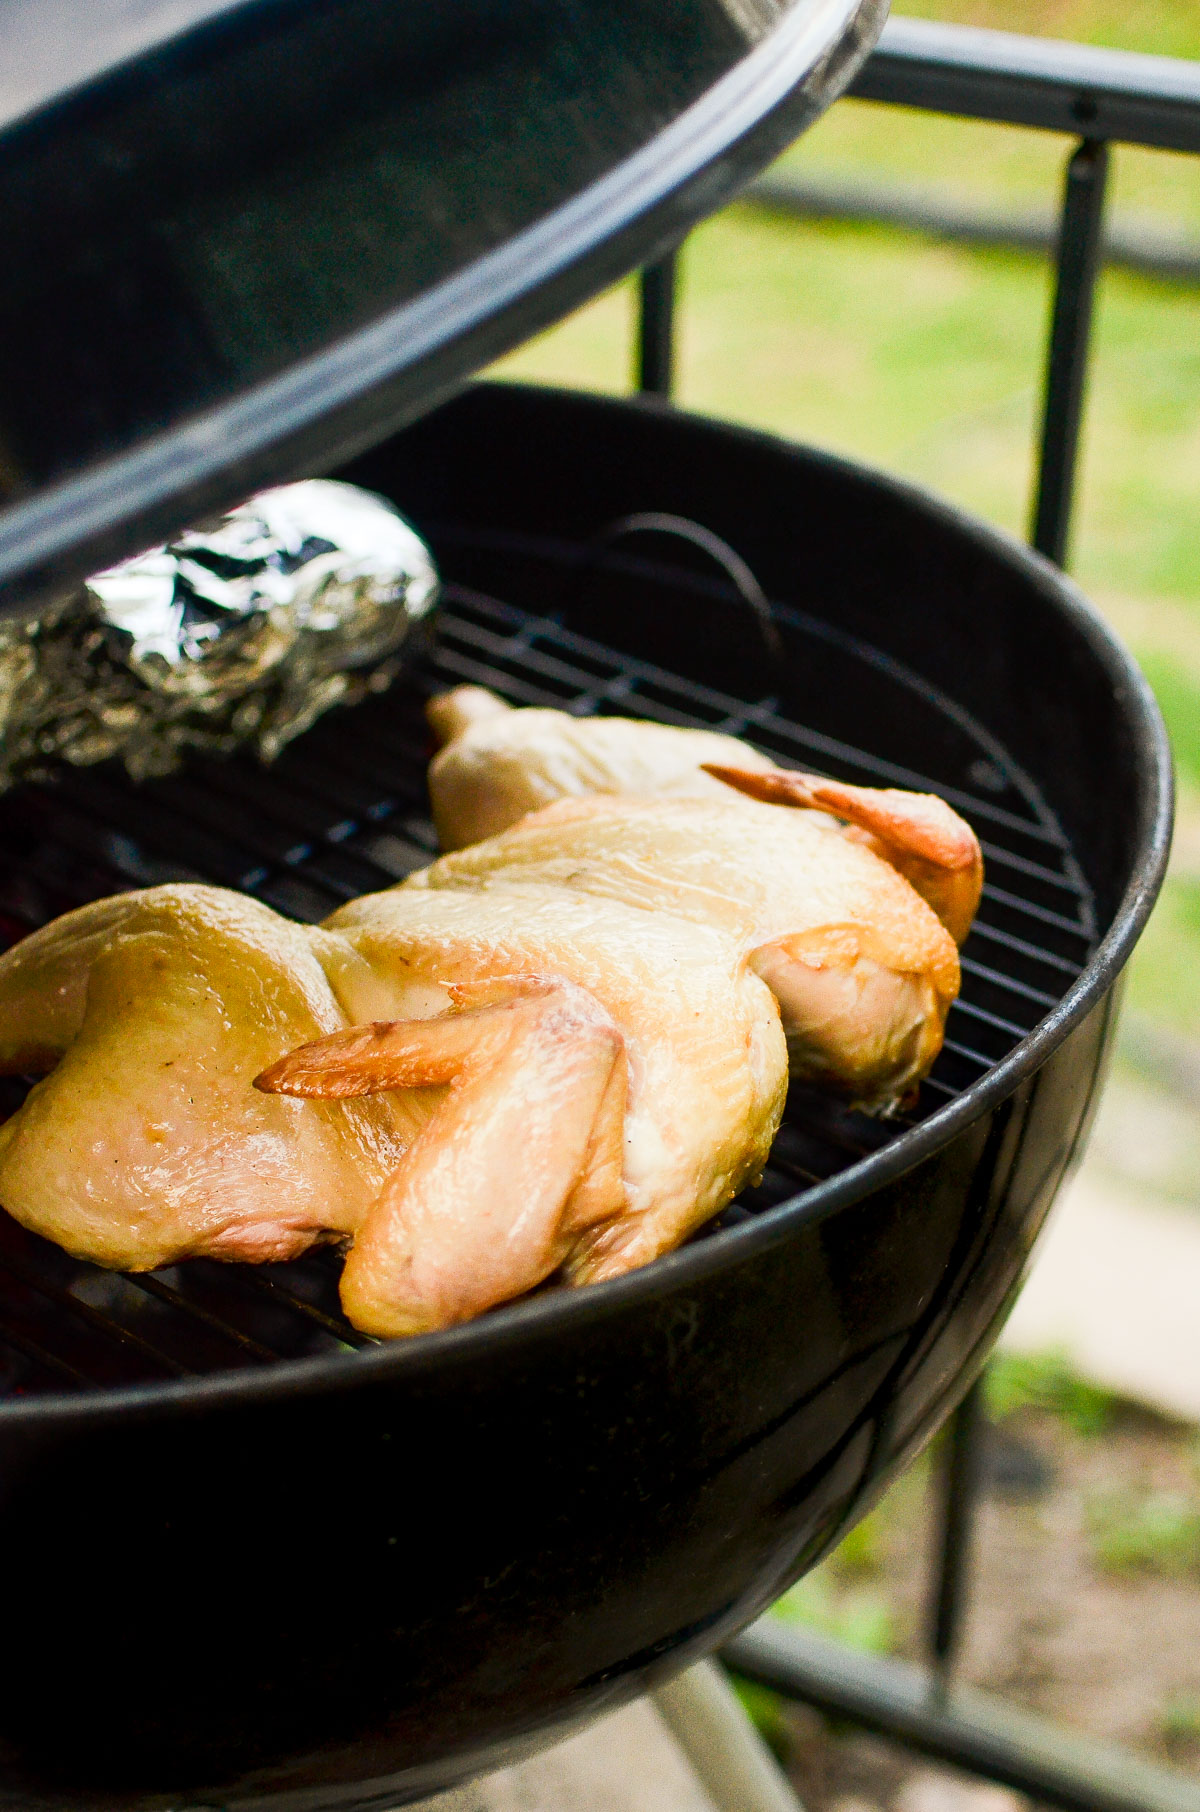 How to grill whole chicken